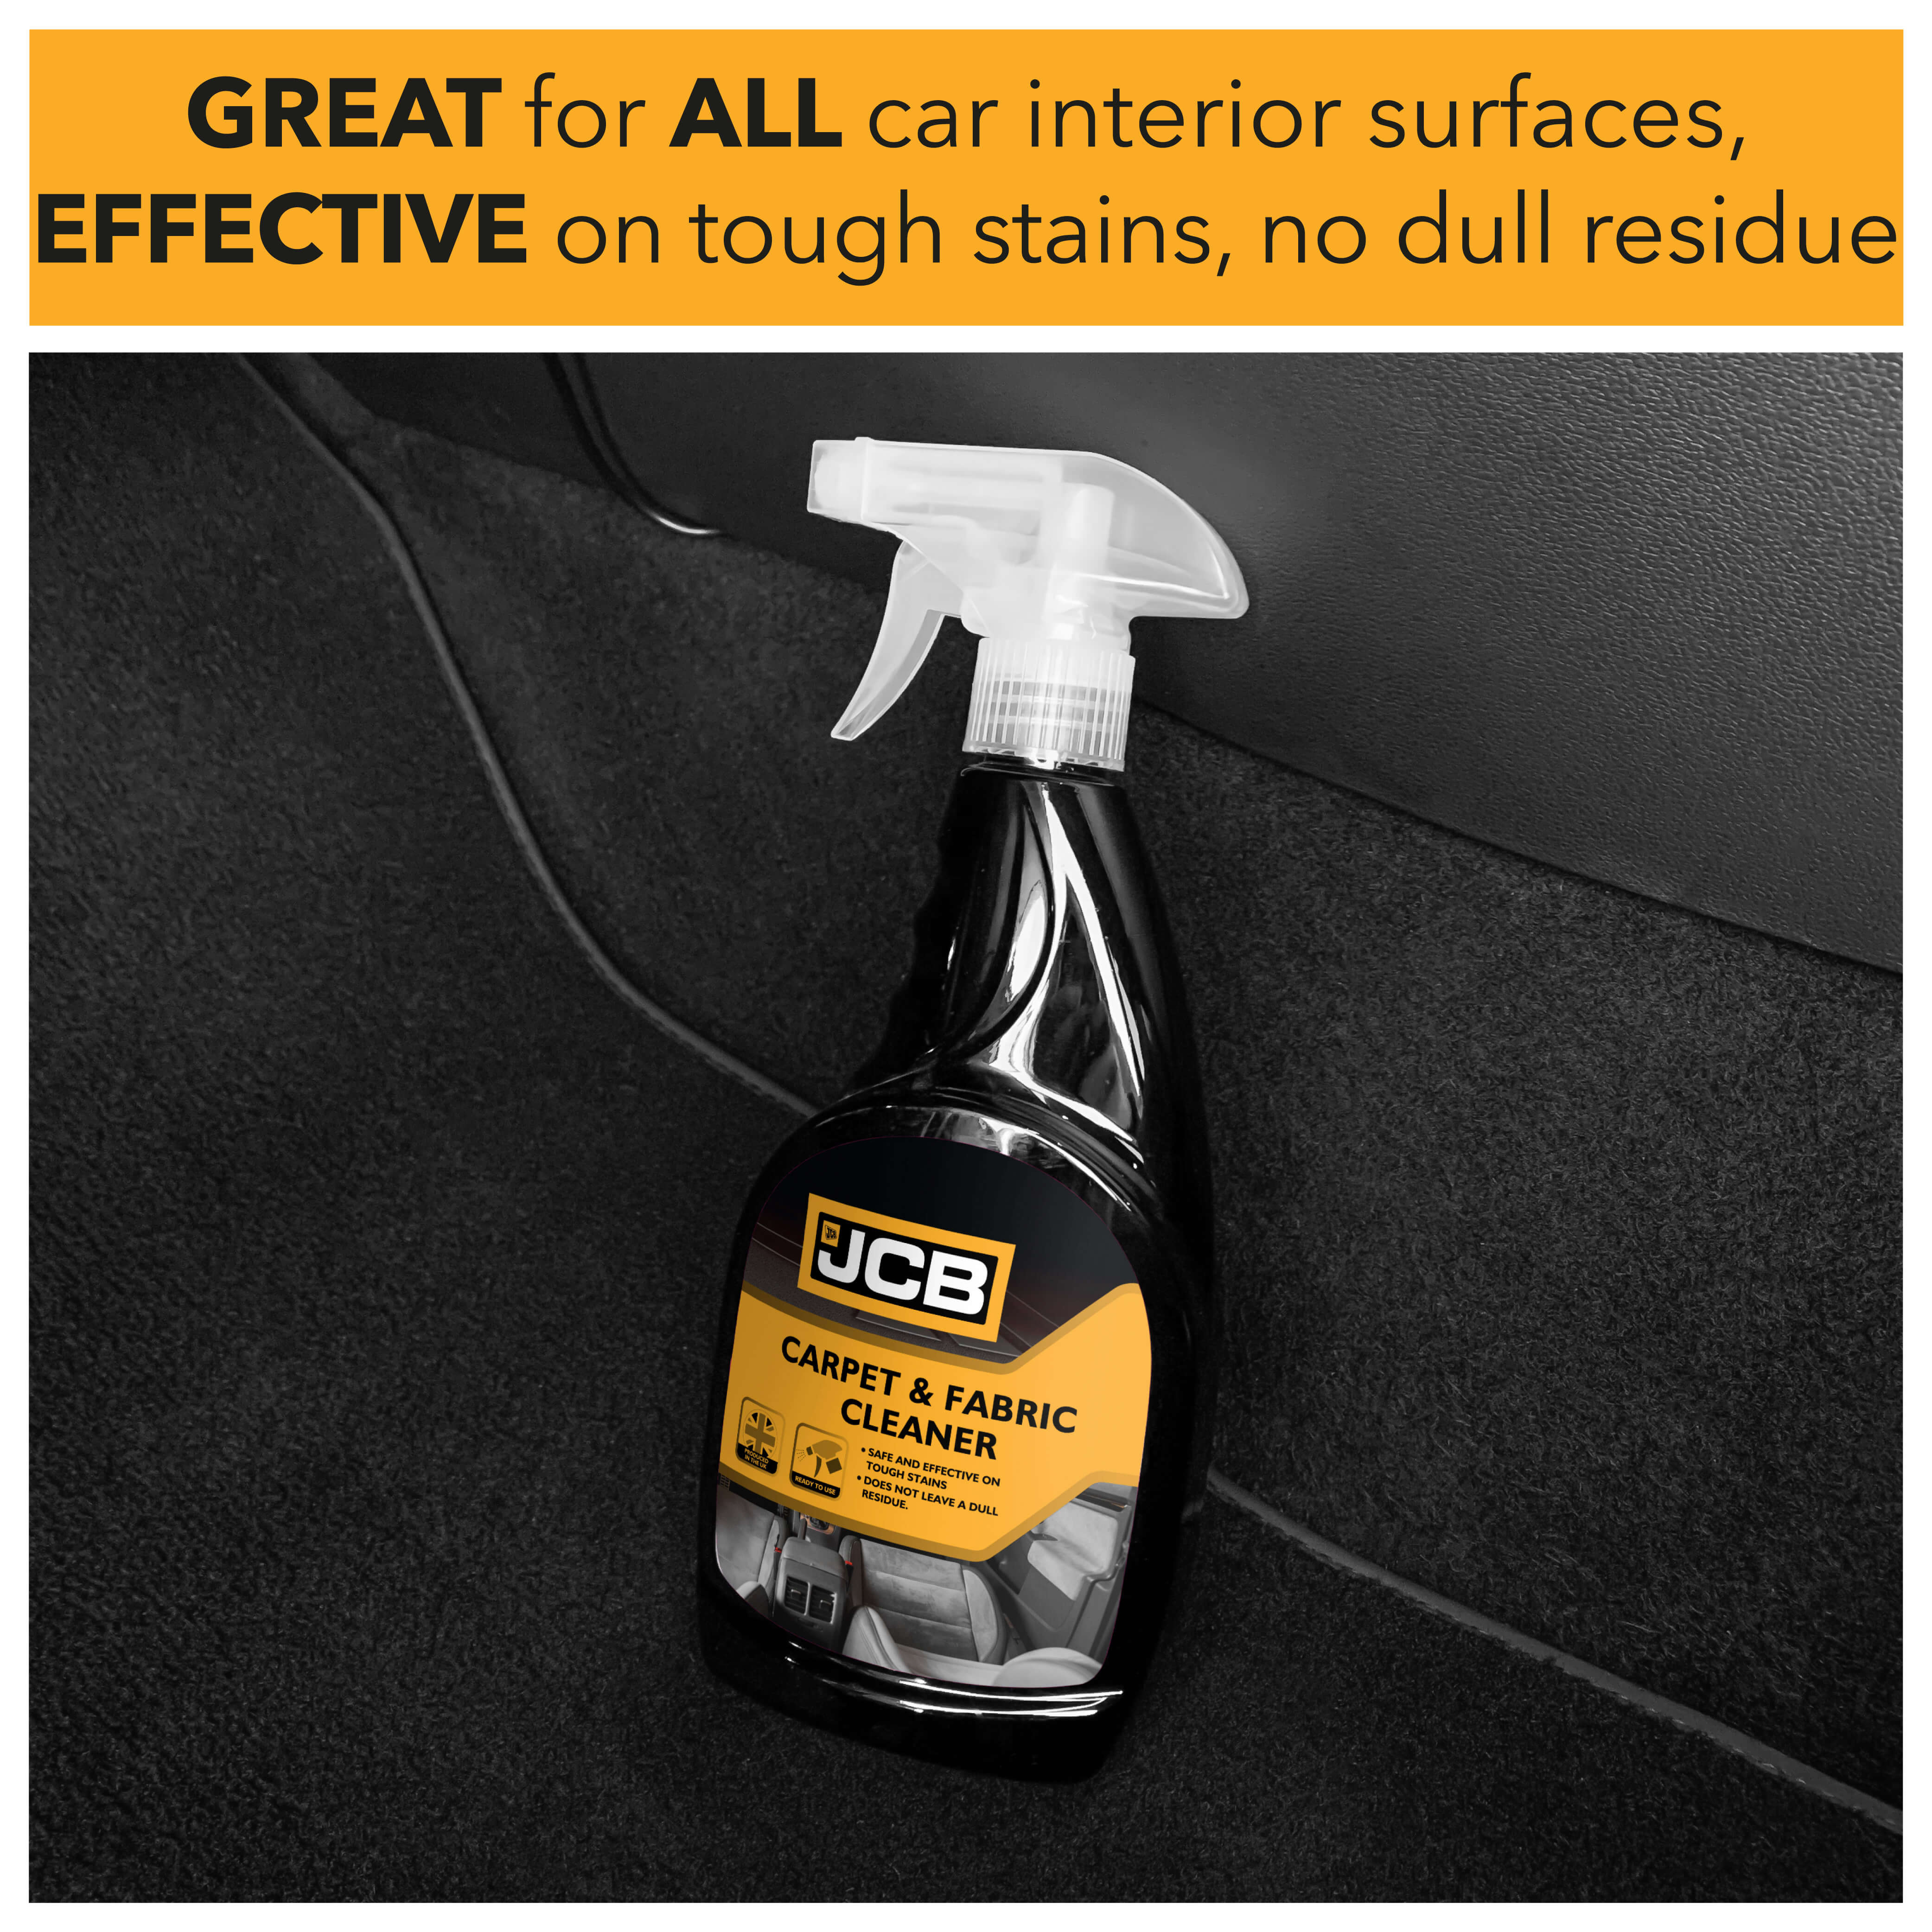 Great for all car interior surfaces, effective on tough stains, no dull residue